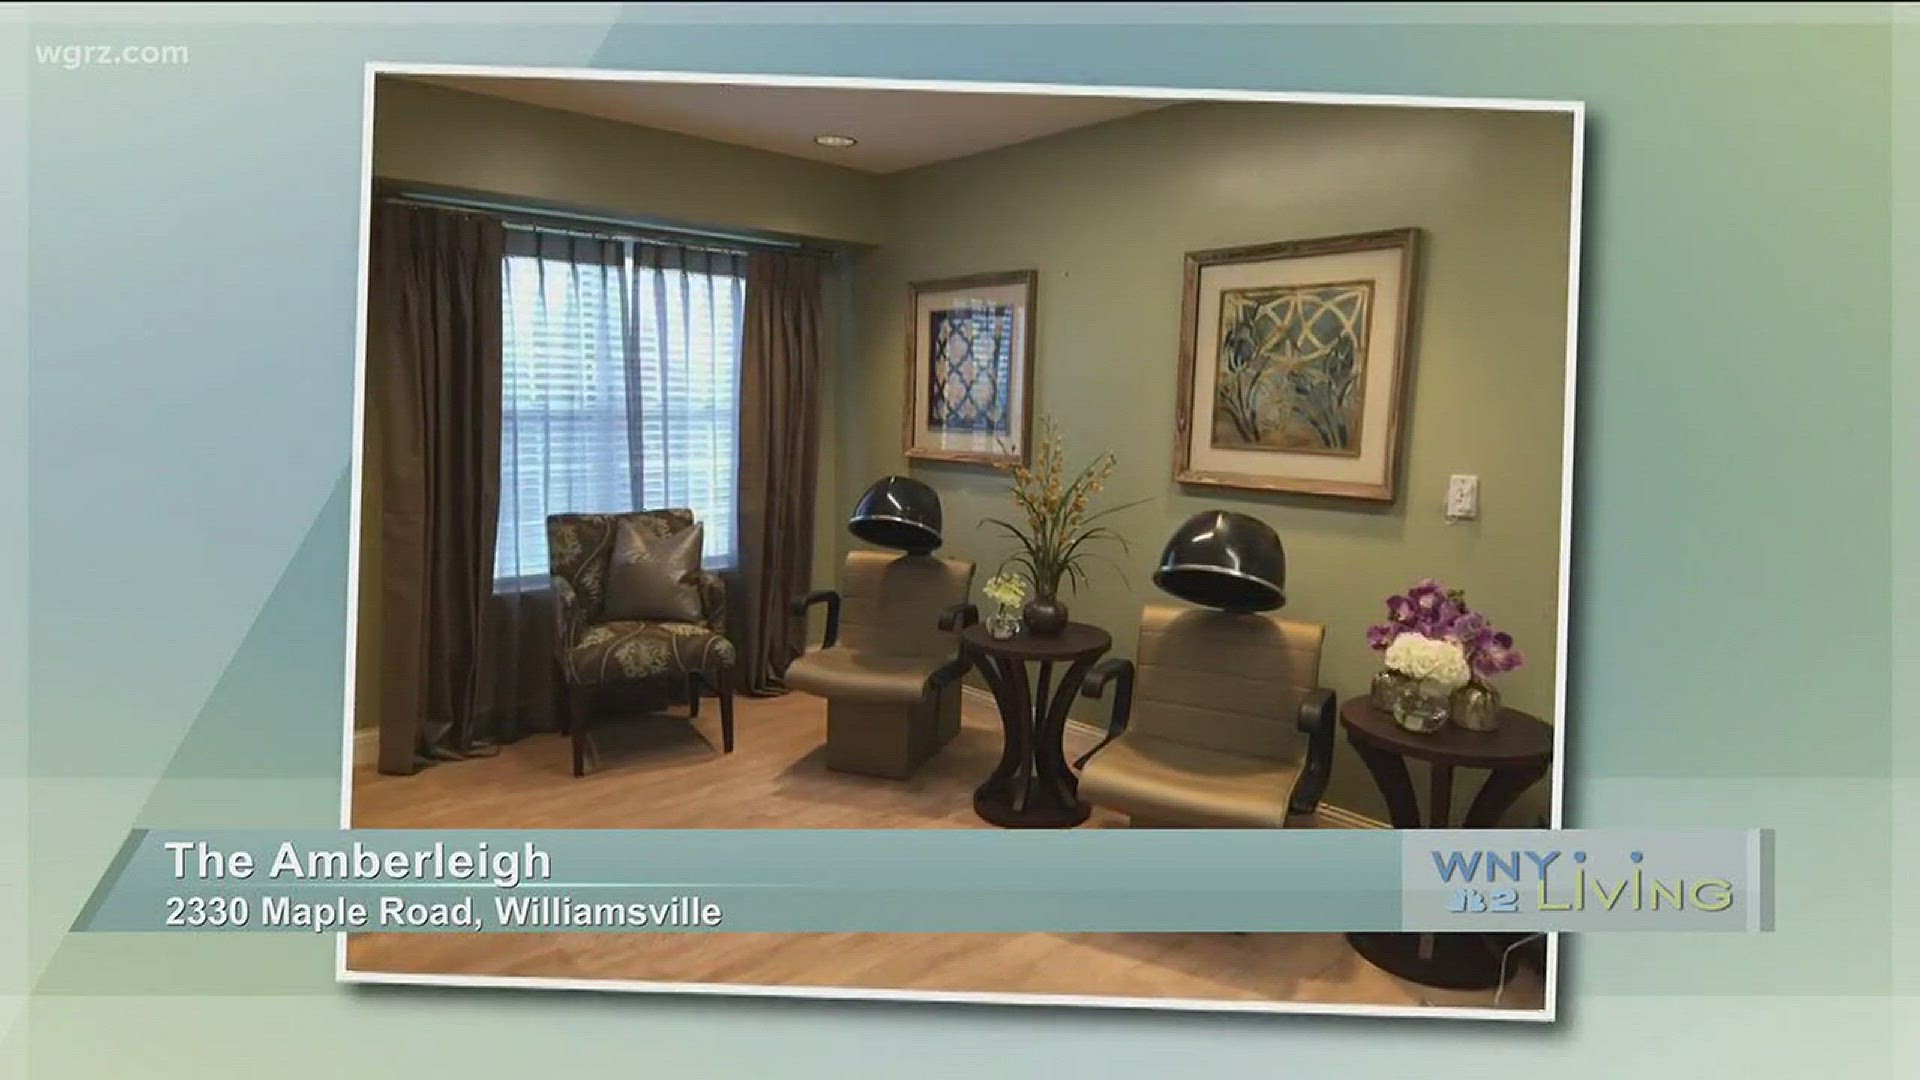 WNY Living - March 12 - The Amberleigh